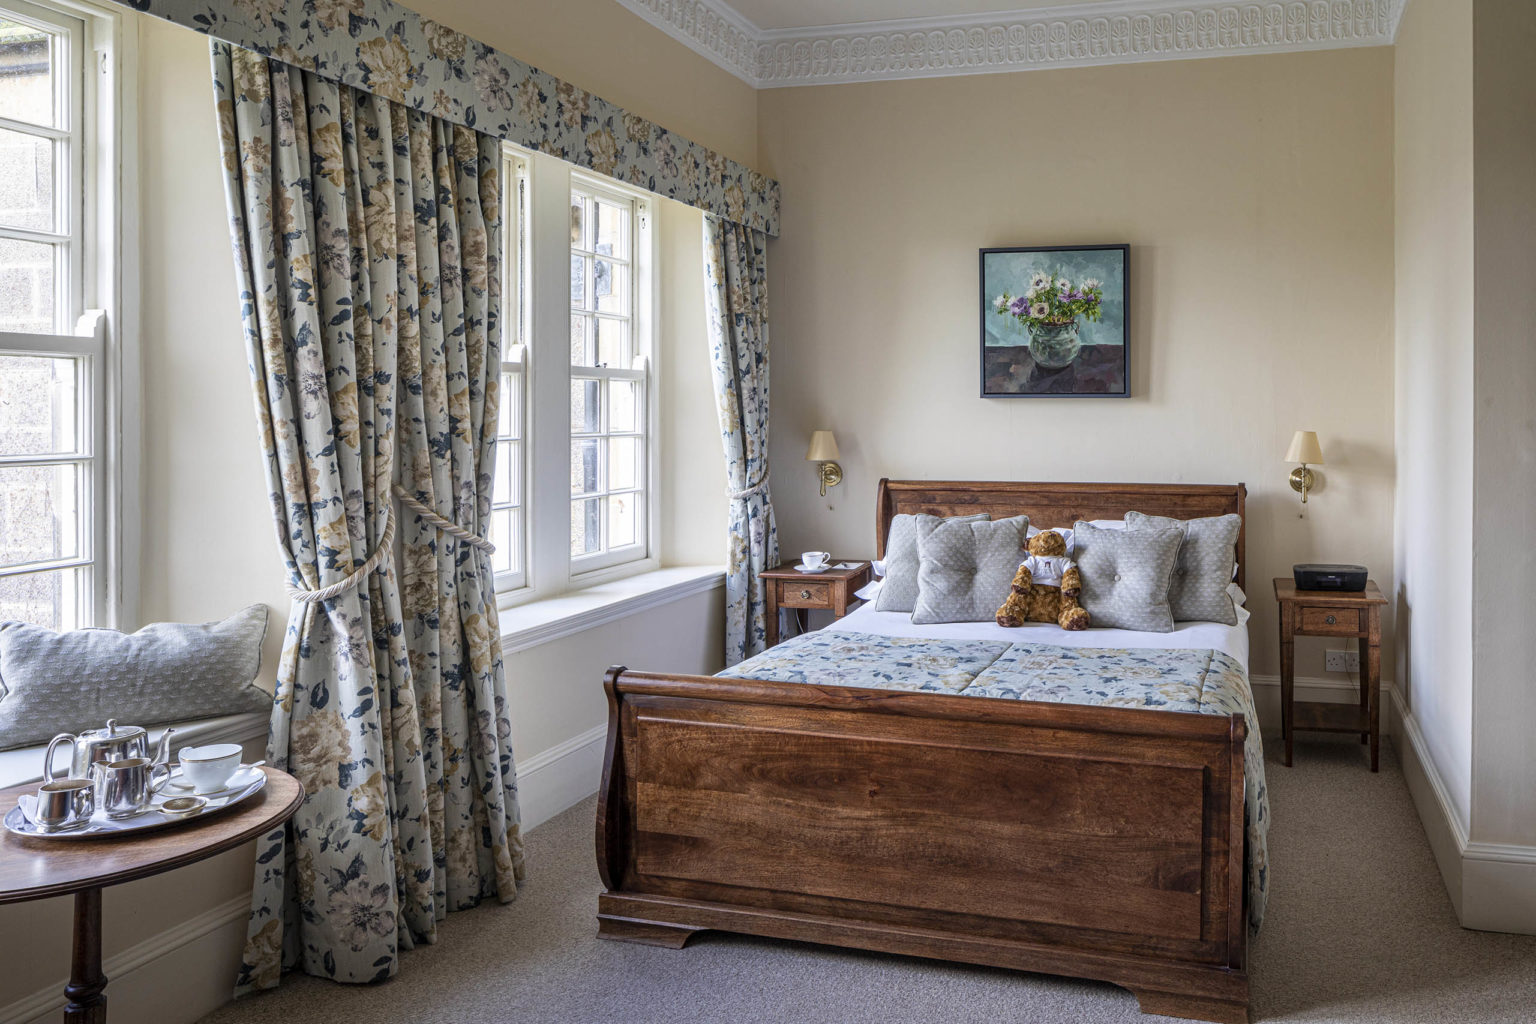 The bedroom of the Harewood suite in Swinton Park Hotel in North Yorkshire